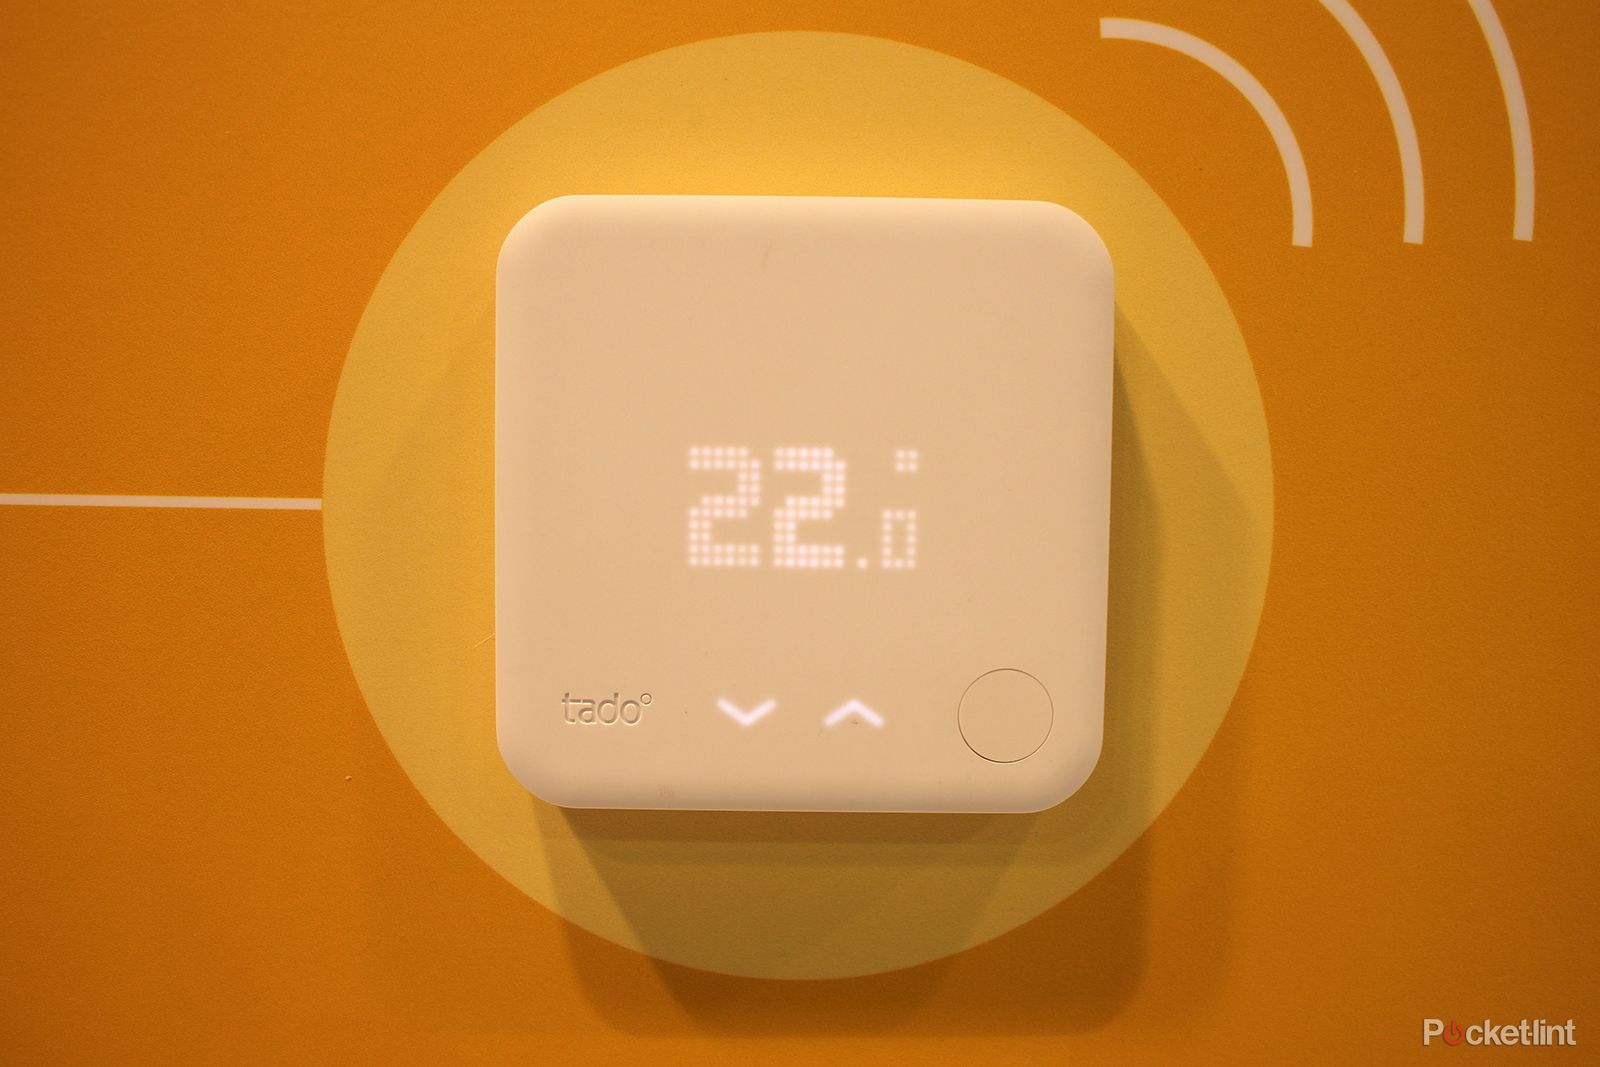 Amazing Tado Boxing Day deals give you whole smart heating system with 30 per cent off image 1